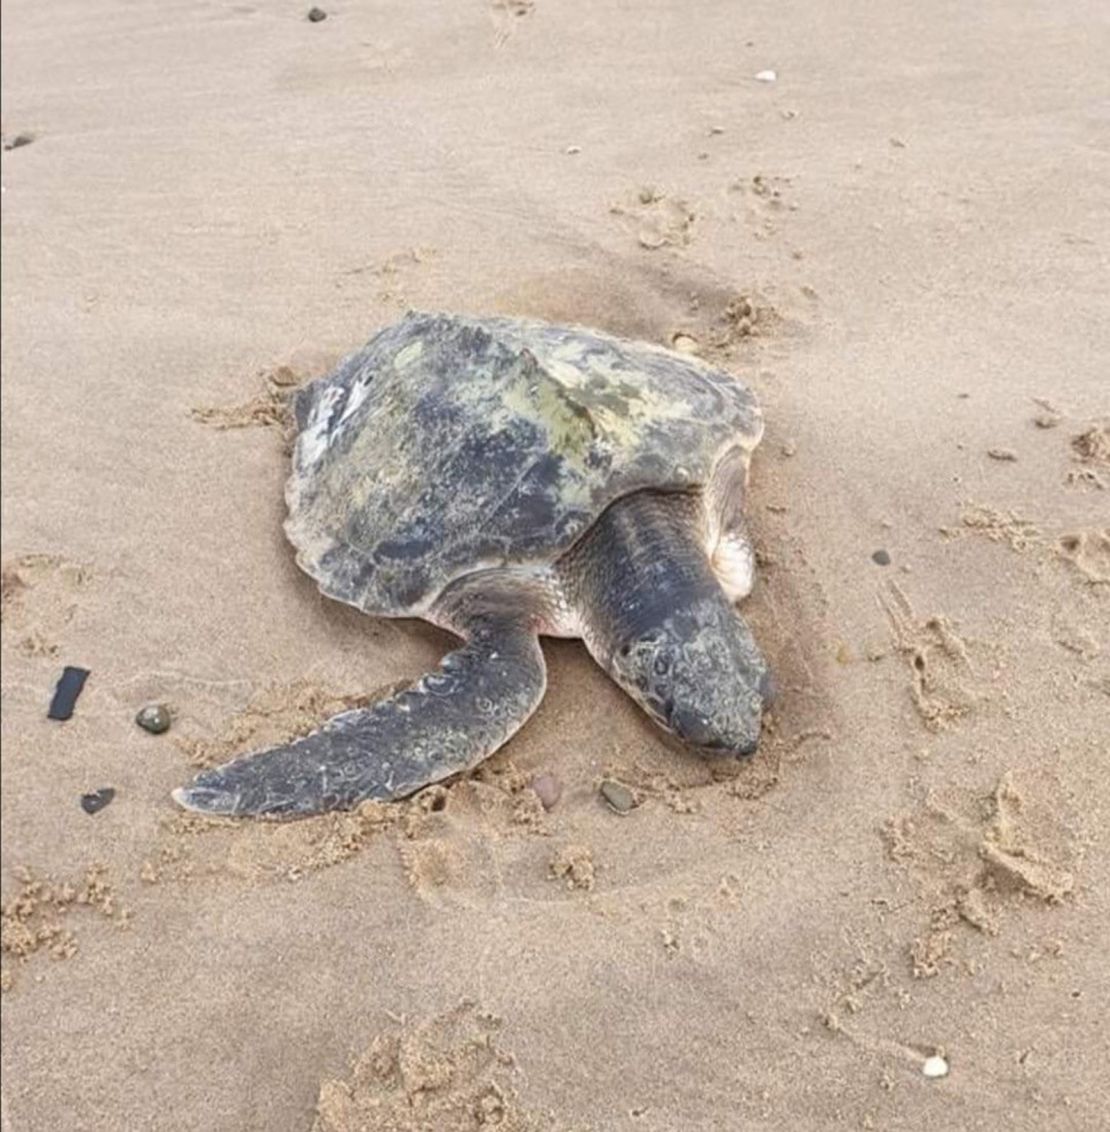 Tally, a Kemp's Ridley sea turtle, washed up on Talacre beach in Wales on Sunday.